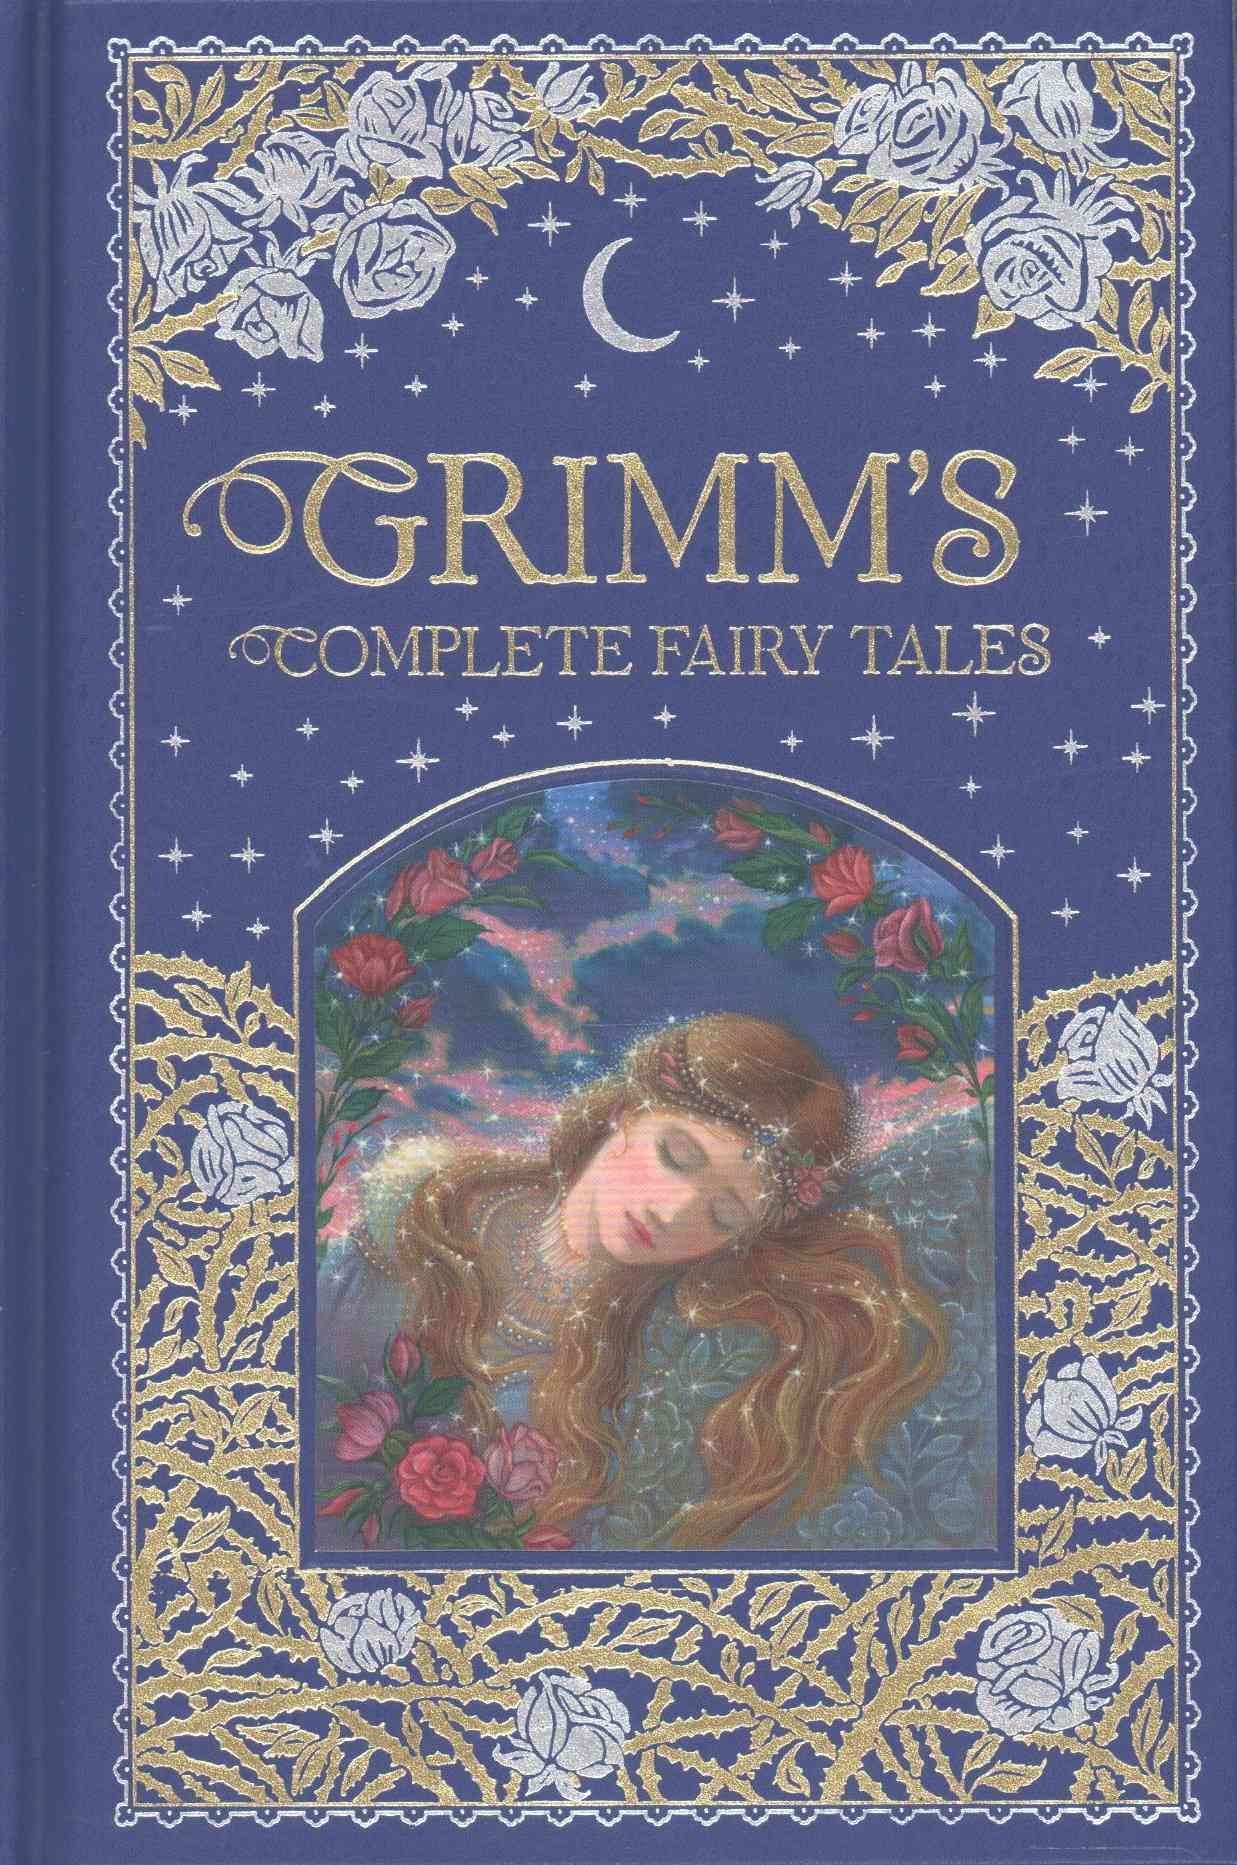 Buy Grimm's Complete Fairy Tales (Barnes & Noble Collectible